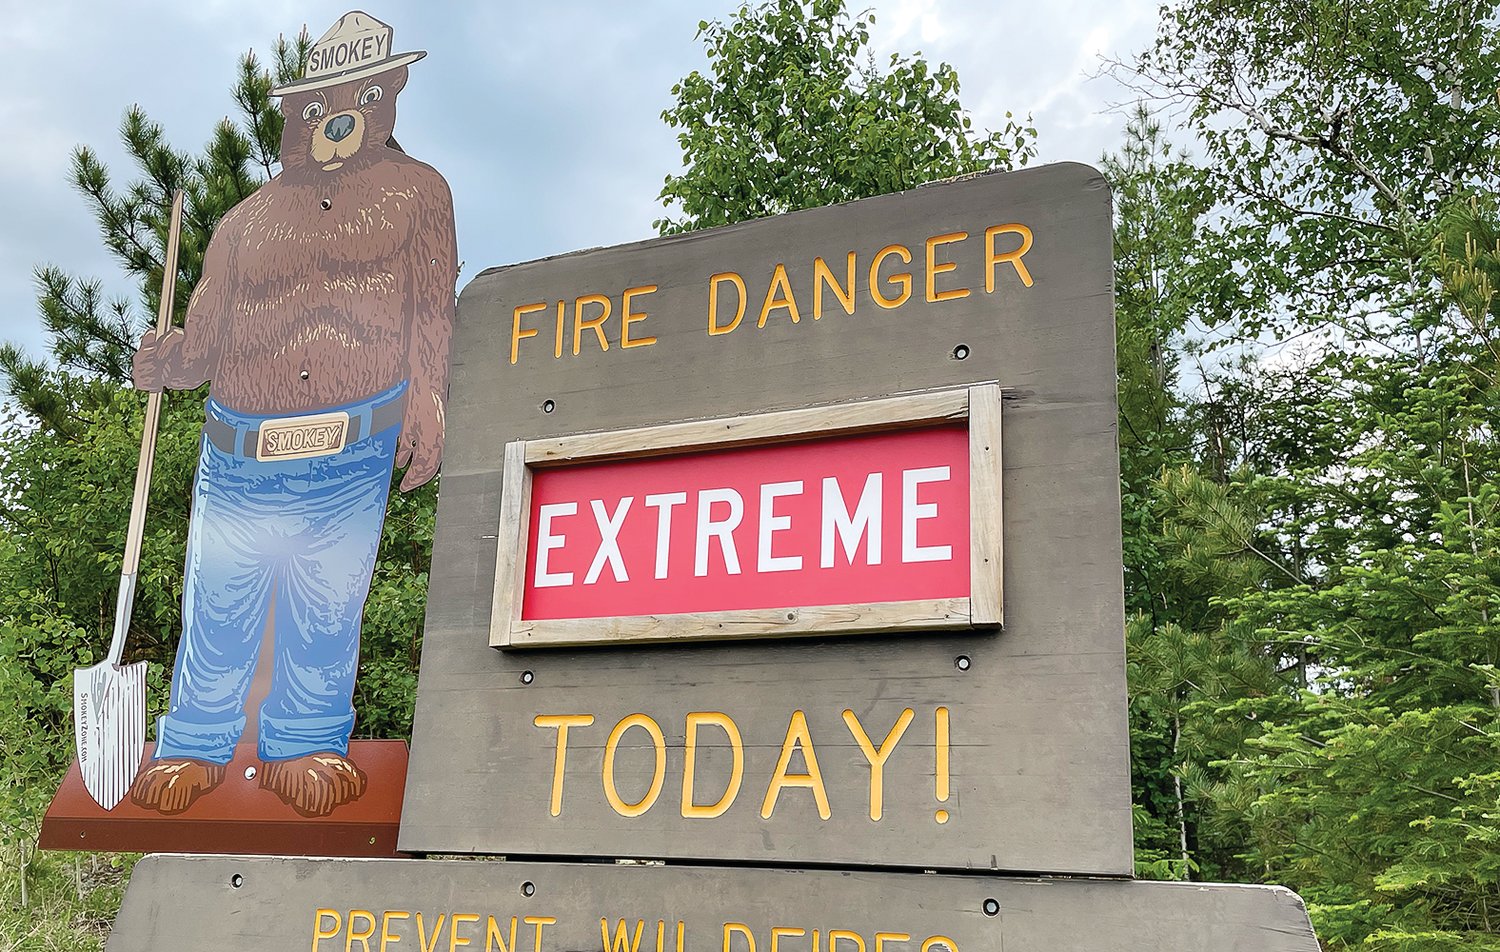 Smokey the Bear puts the word out about the fire danger that has been in place throughout most of the snow-free season so far this year. On and off rains have helped at times, but the overall trend has kept danger high, even during what is usually the coolest and wettest part of the summer.